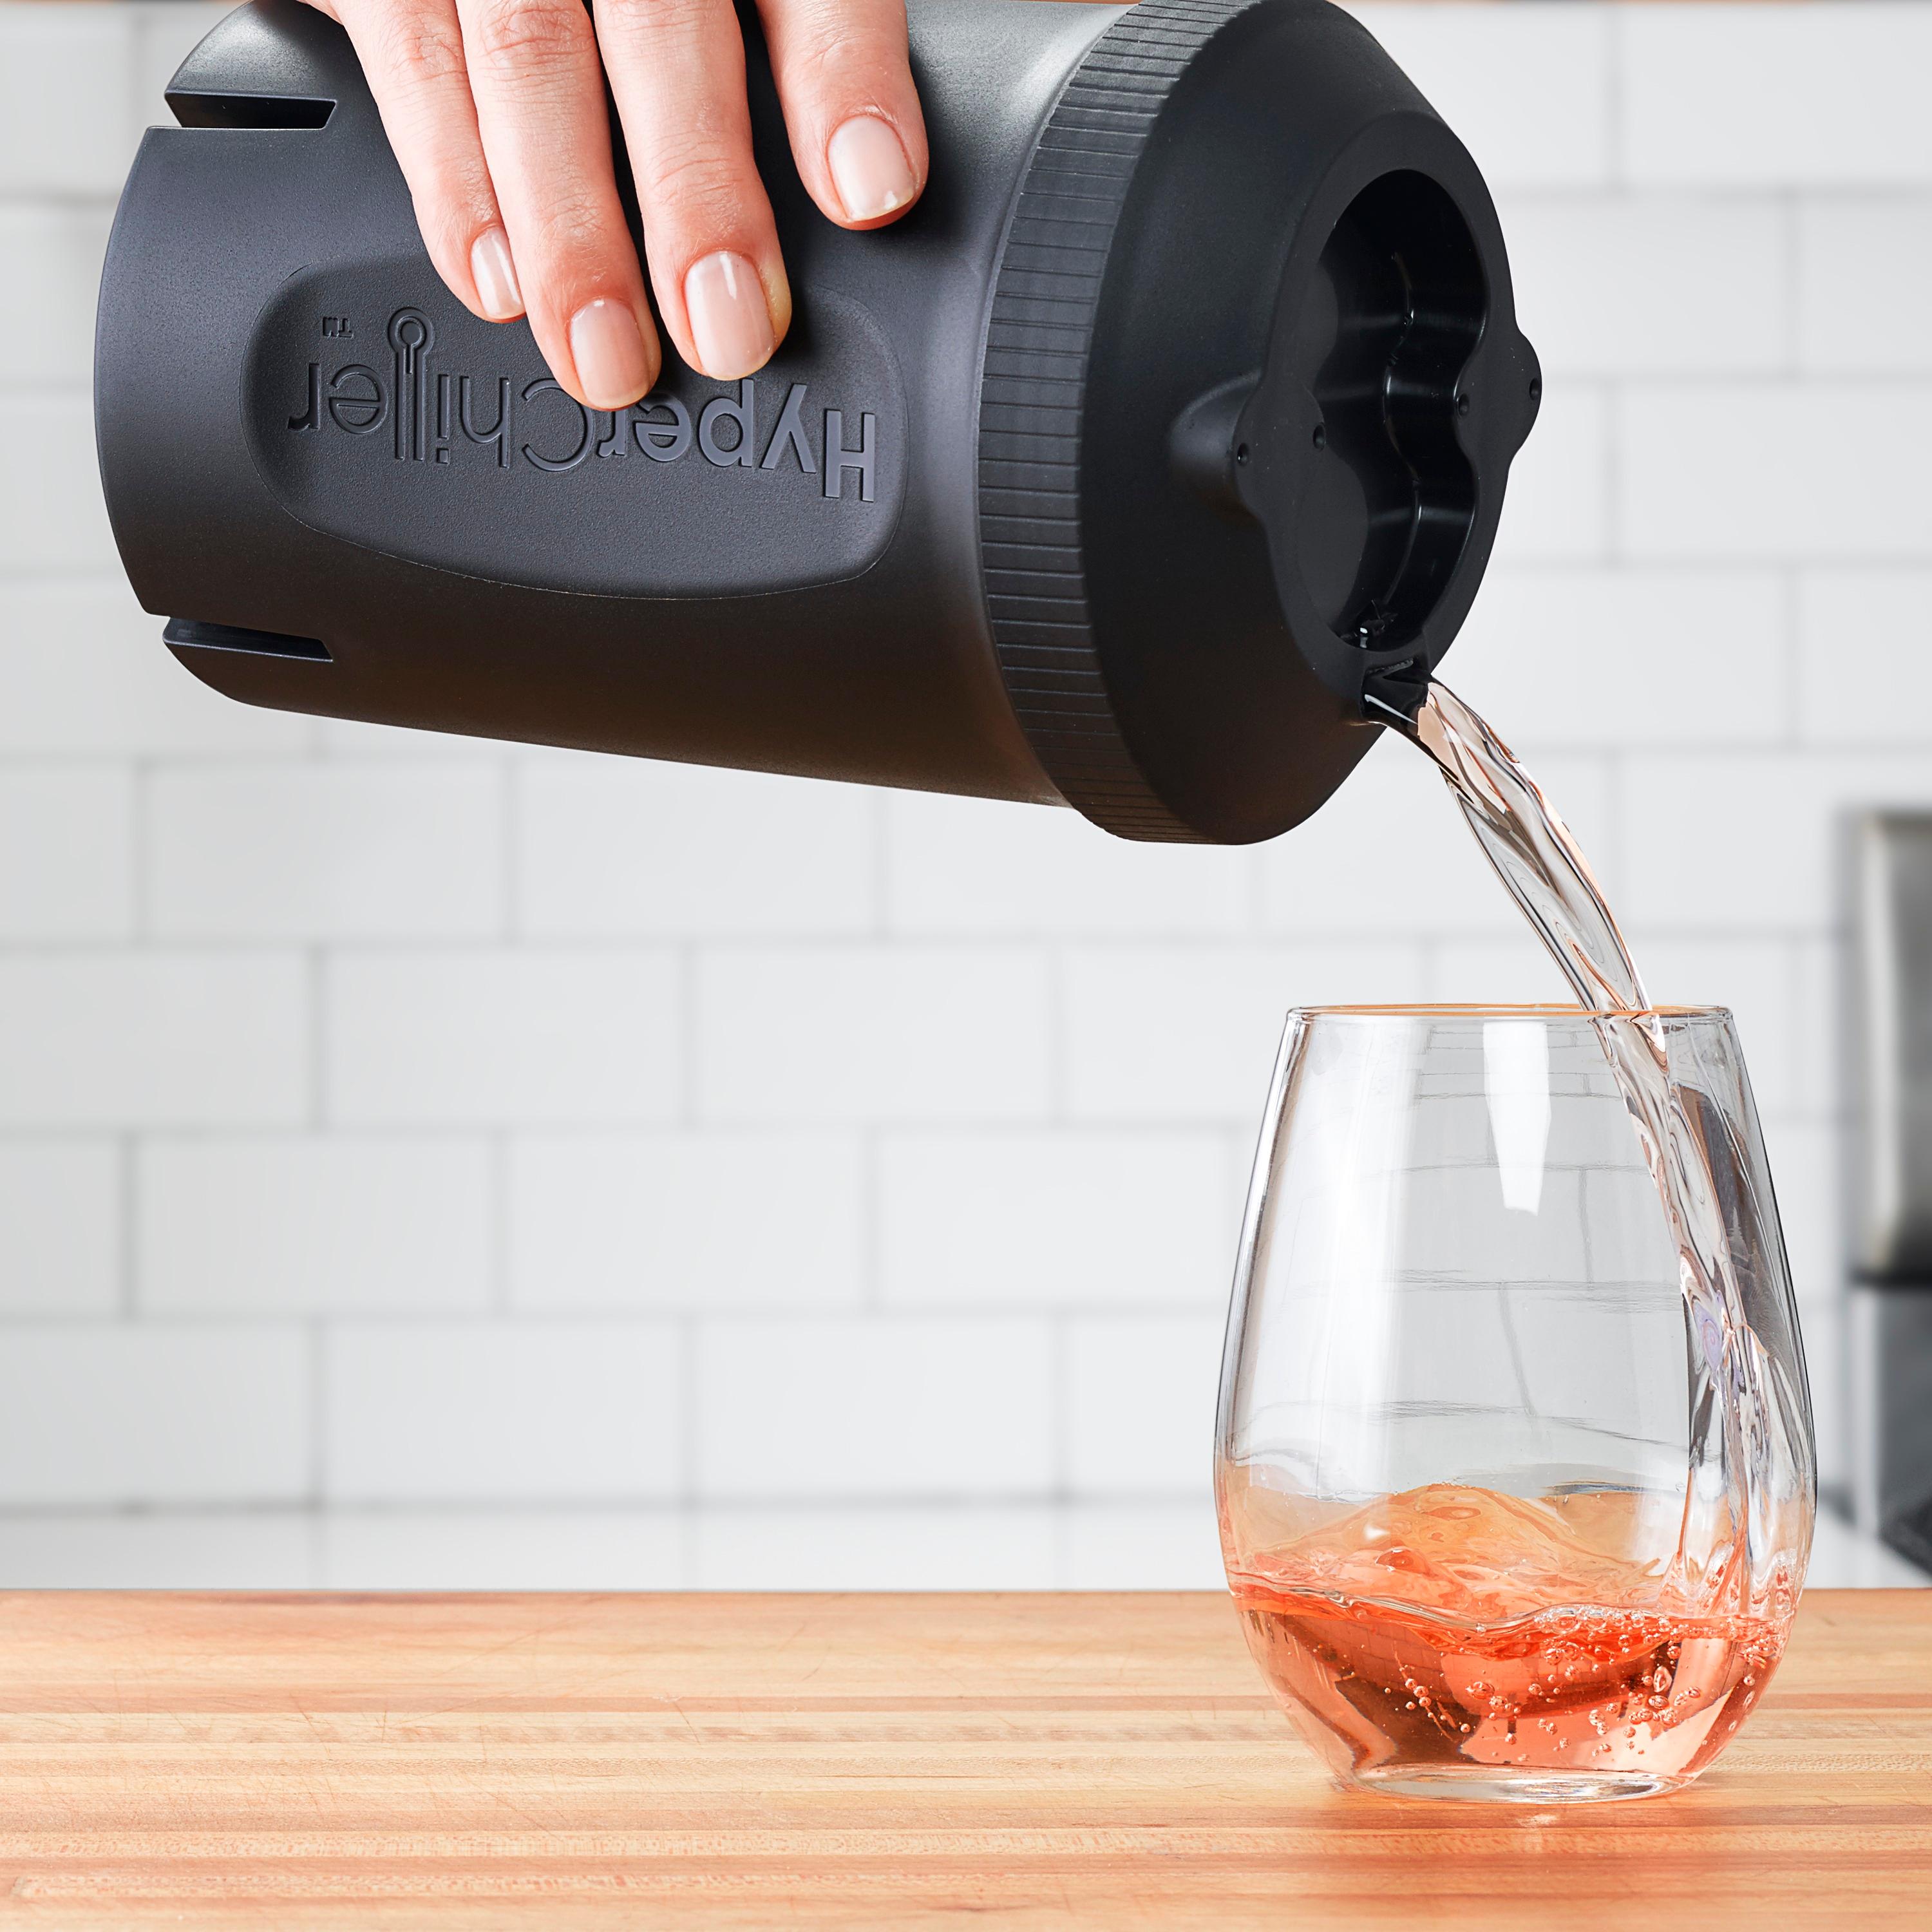 The HyperChiller Iced Coffee Maker On  Will Cool Your Hot Coffee In  One Minute